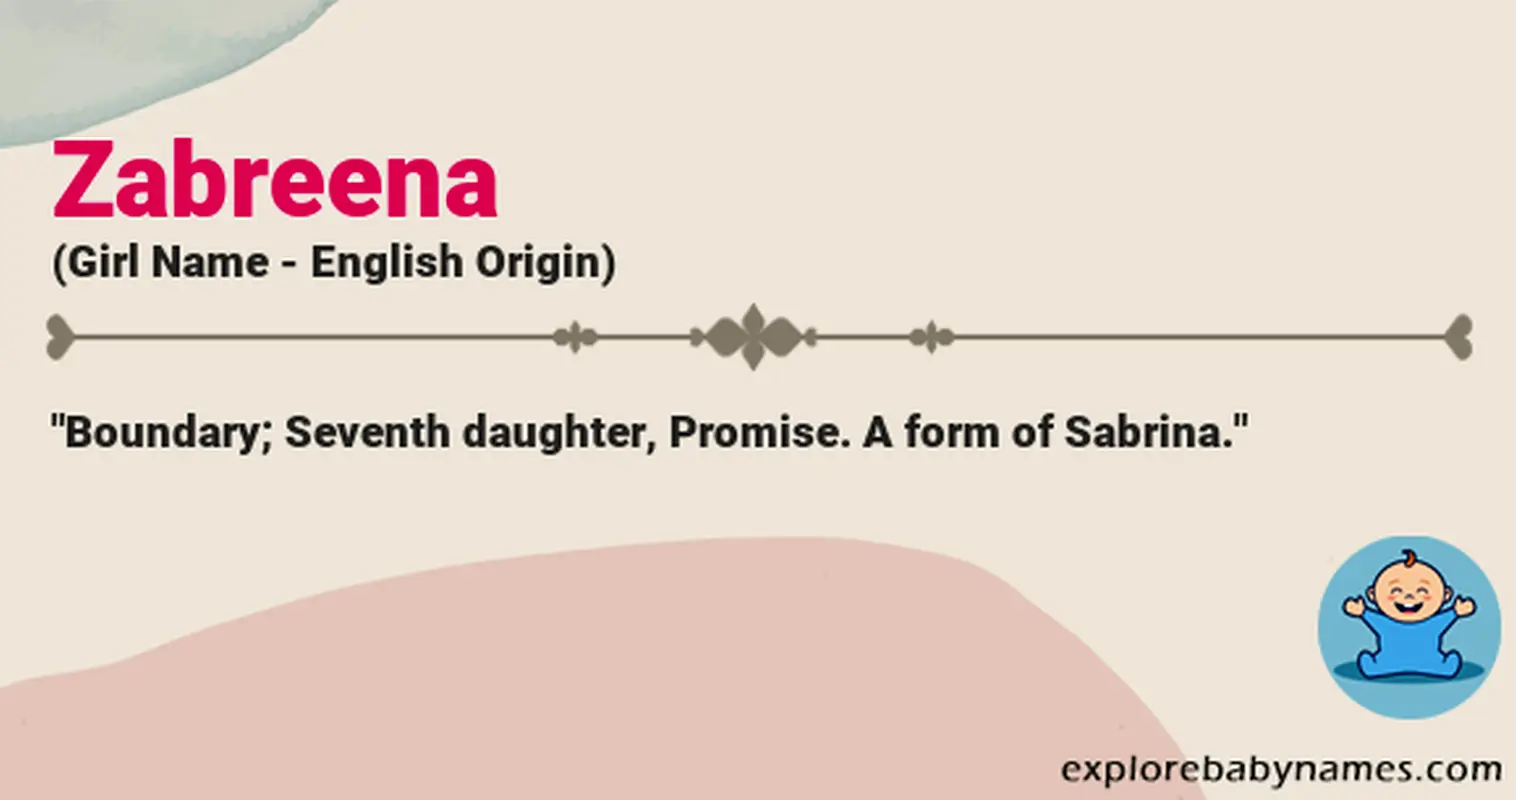 Meaning of Zabreena